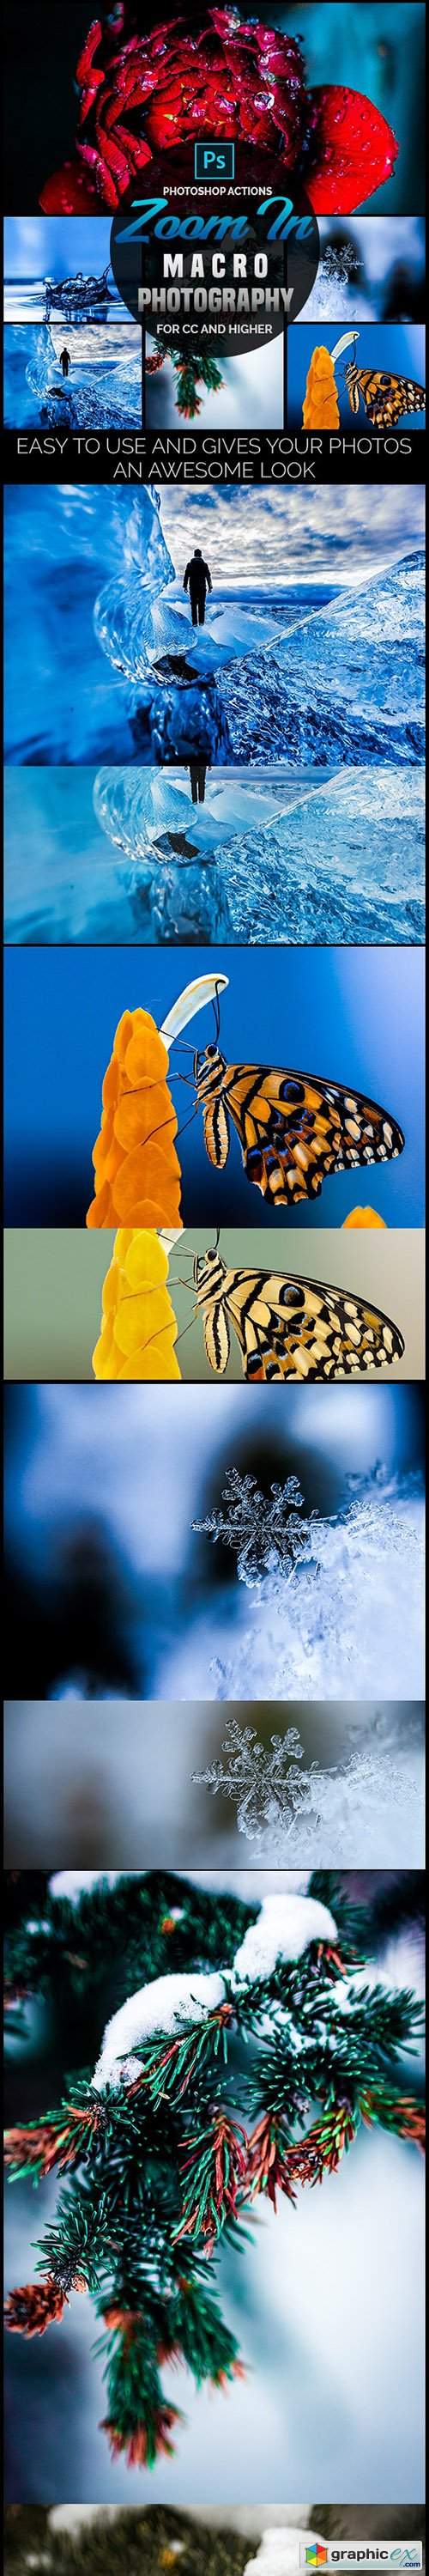 Zoom In - Macro Photography Photoshop Actions 